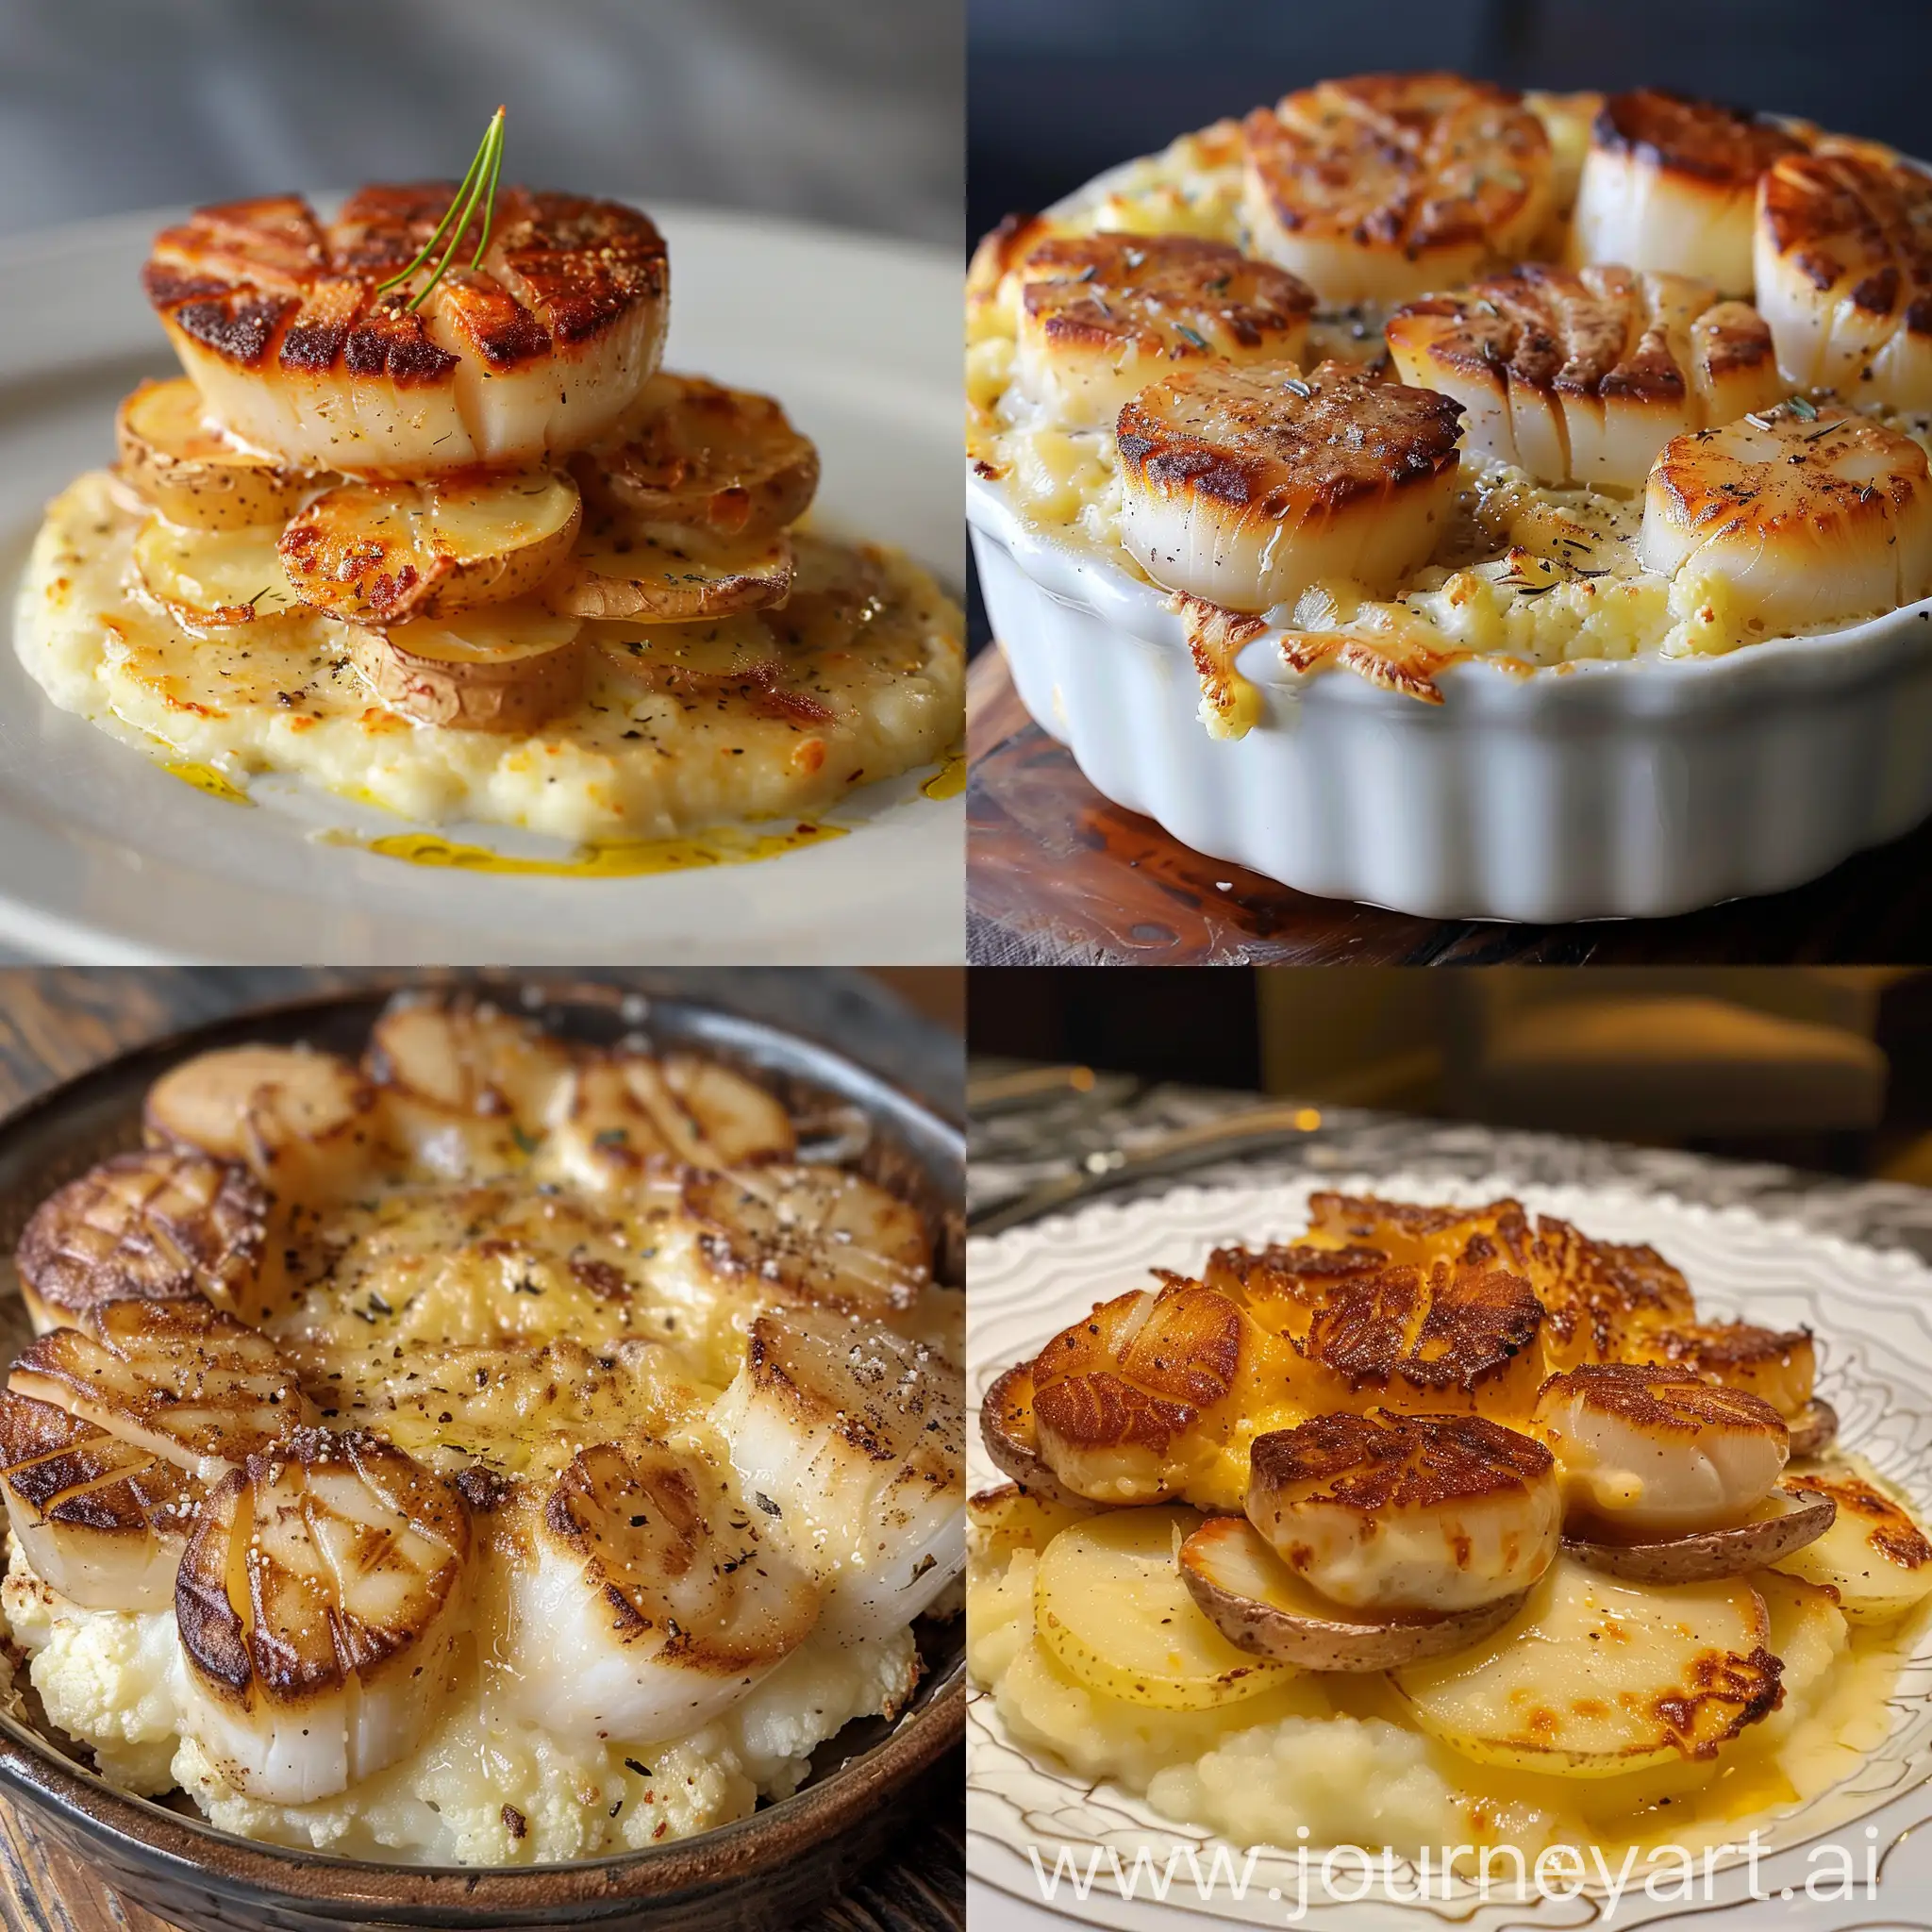 Buttery scallops sitting proudly atop a pillow of cauliflower purée. A luxurious potato gratin with paper thin slices of fingerling potatoes layered with a rich and creamy fontina cheese sauce, gratinated to a crispy golden brown worthy of a 3 Michelin star restaurant.